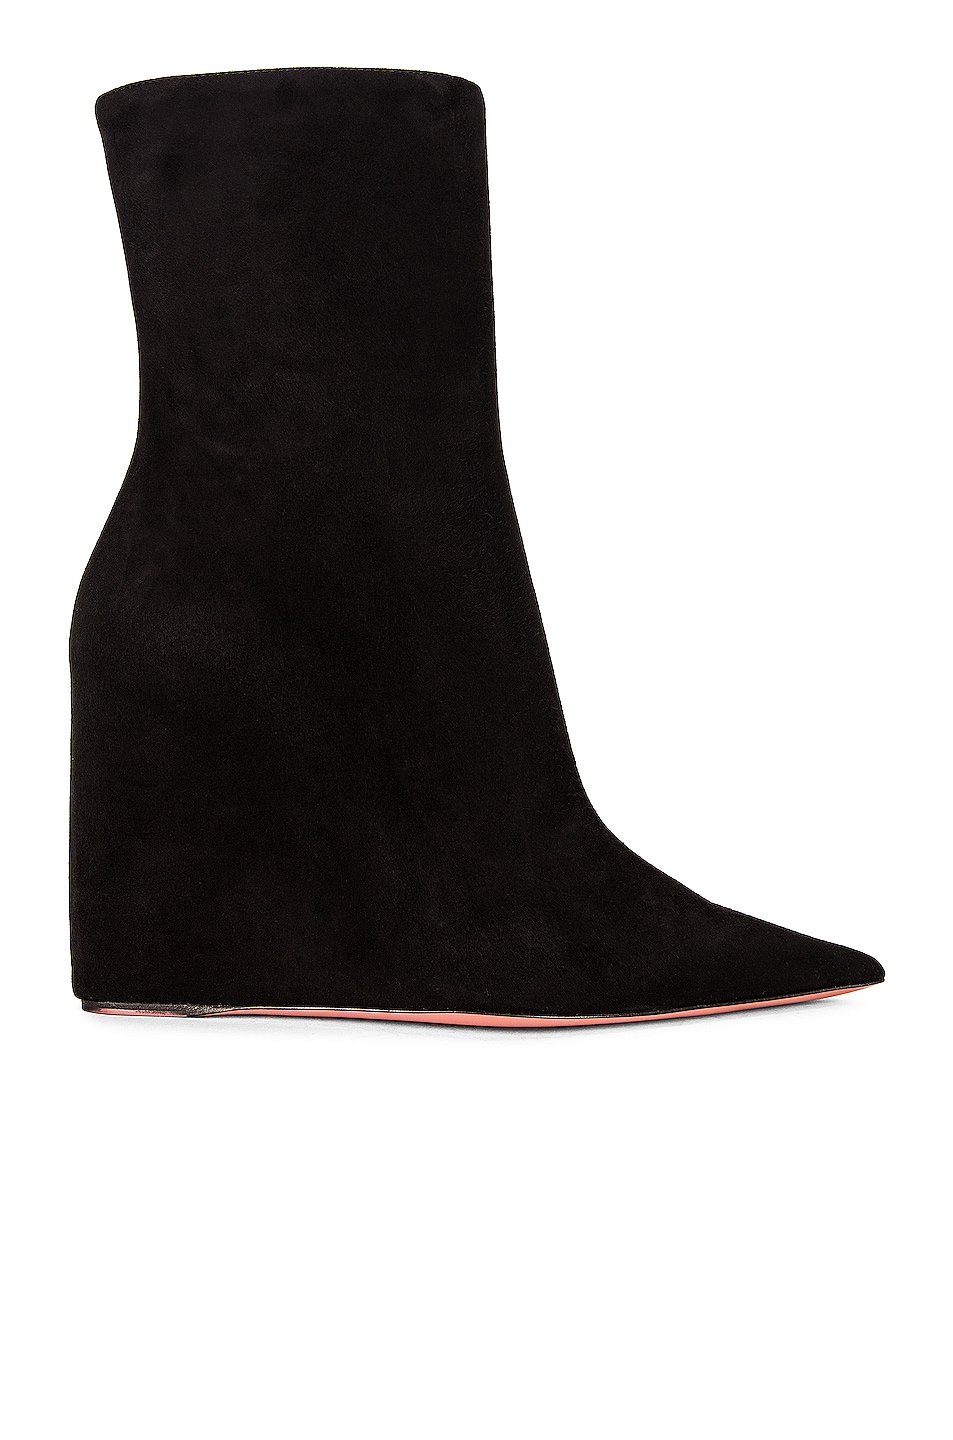 Image 1 of AMINA MUADDI Pernille Wedge Suede Bootie in Black